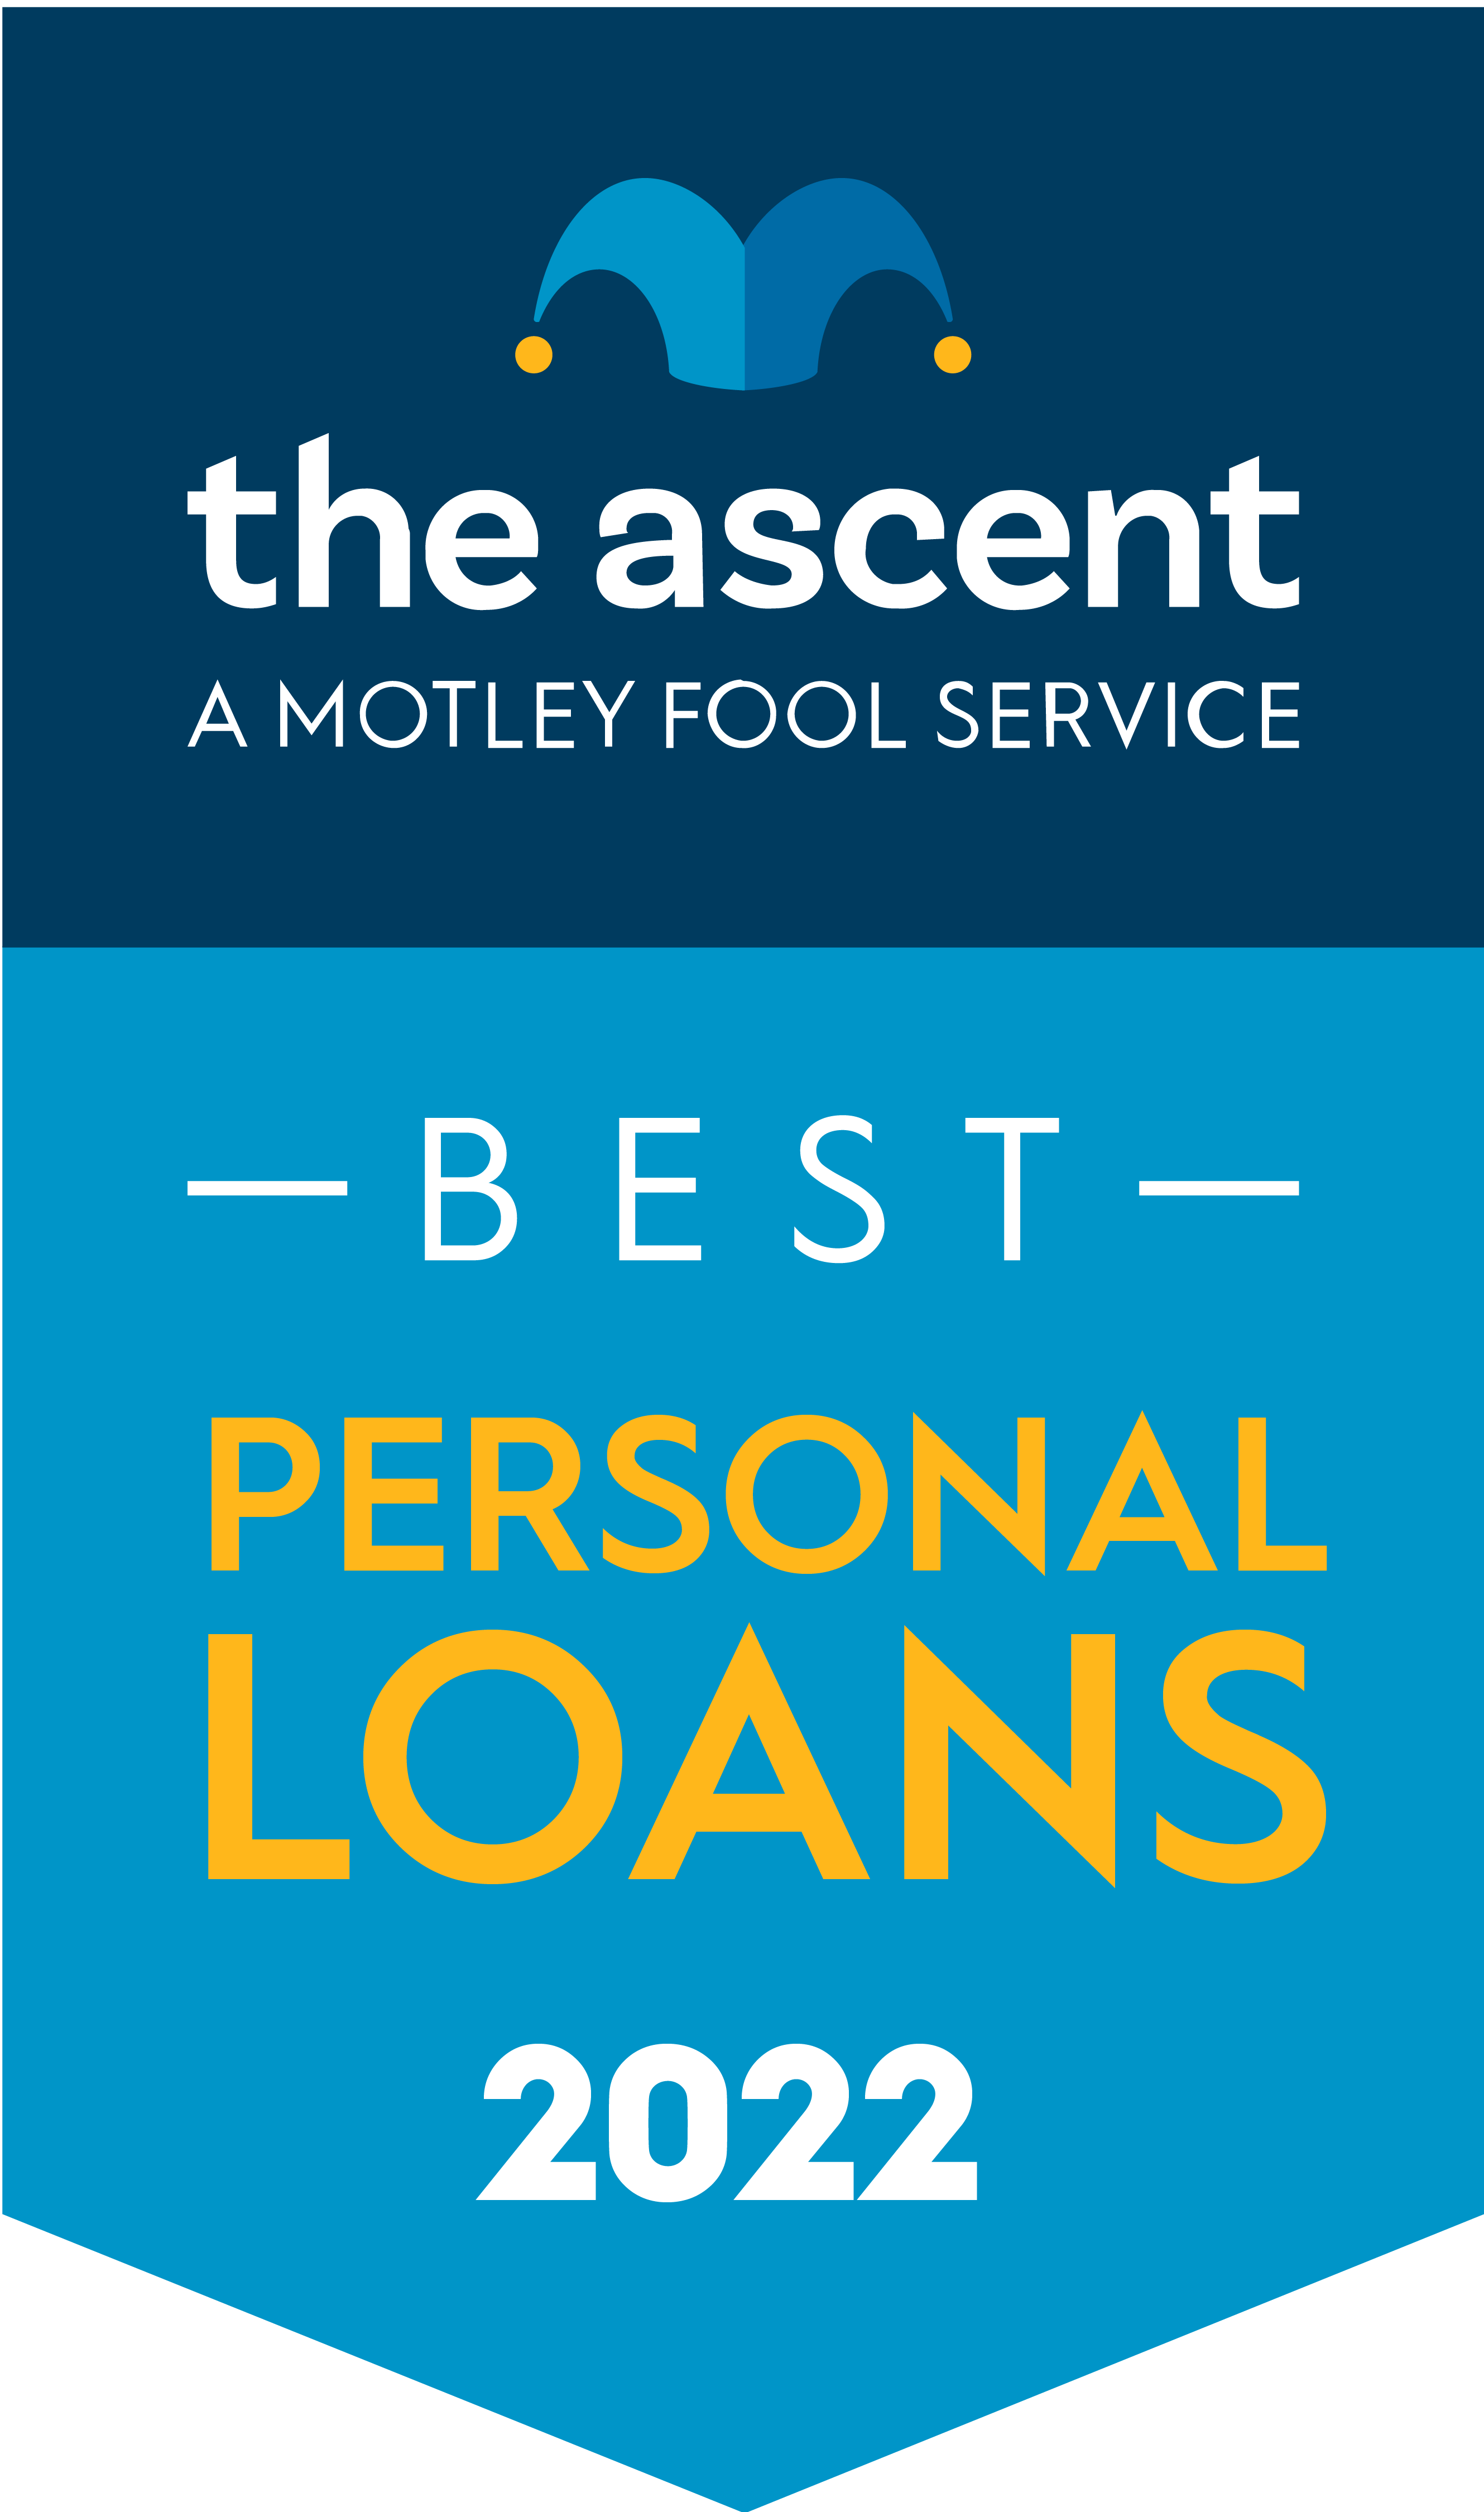 The Ascent’s 2022 Personal Loan Awards Winners award banner